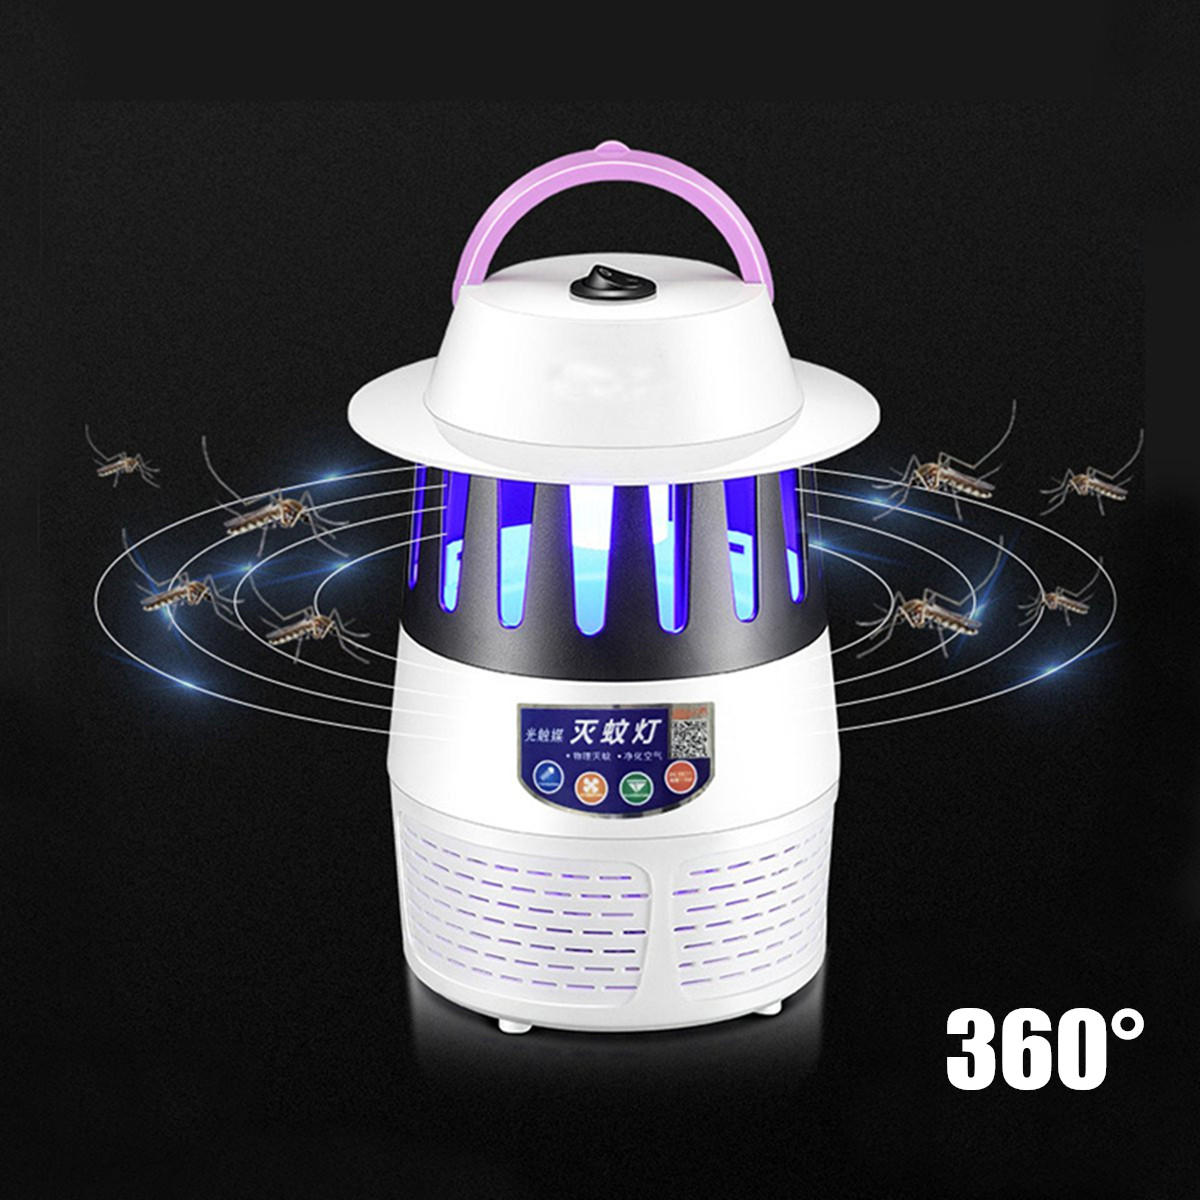 8 LED USB Mosquito Dispeller Repeller Mosquito Killer Lamp Bulb Electric Bug Insect Zapper Pest Trap Light For Yard Outdoor Camping 10